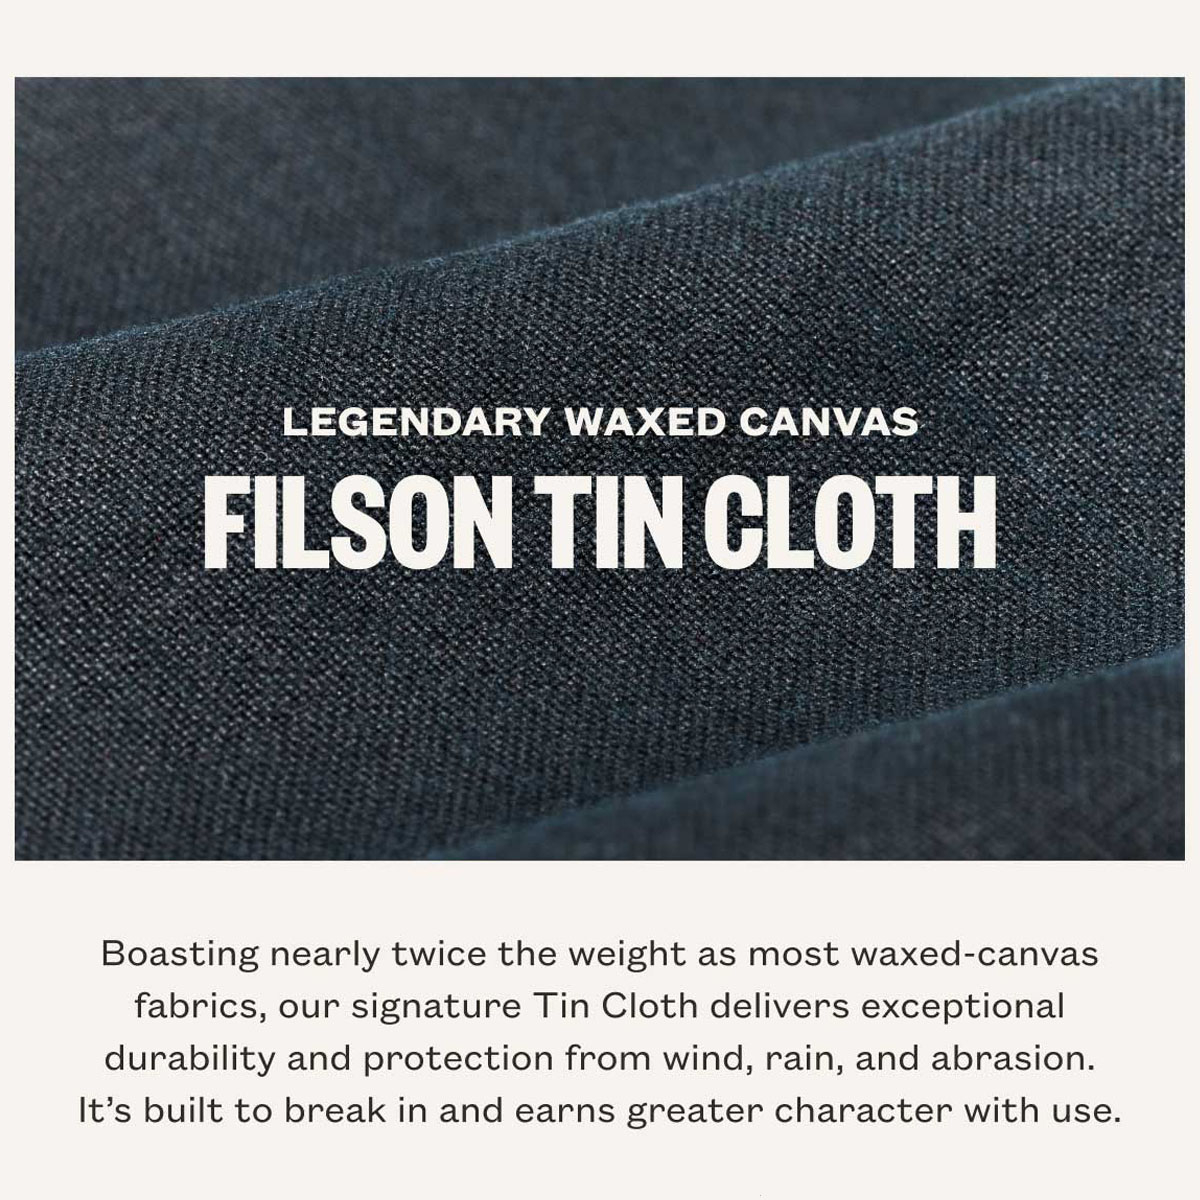 Filson Tin Cloth Short Lined Cruiser Jacket Service Blue, made of the legendary super strong, lightweight, and oil impregnated 14-oz. Tin Cloth canvas